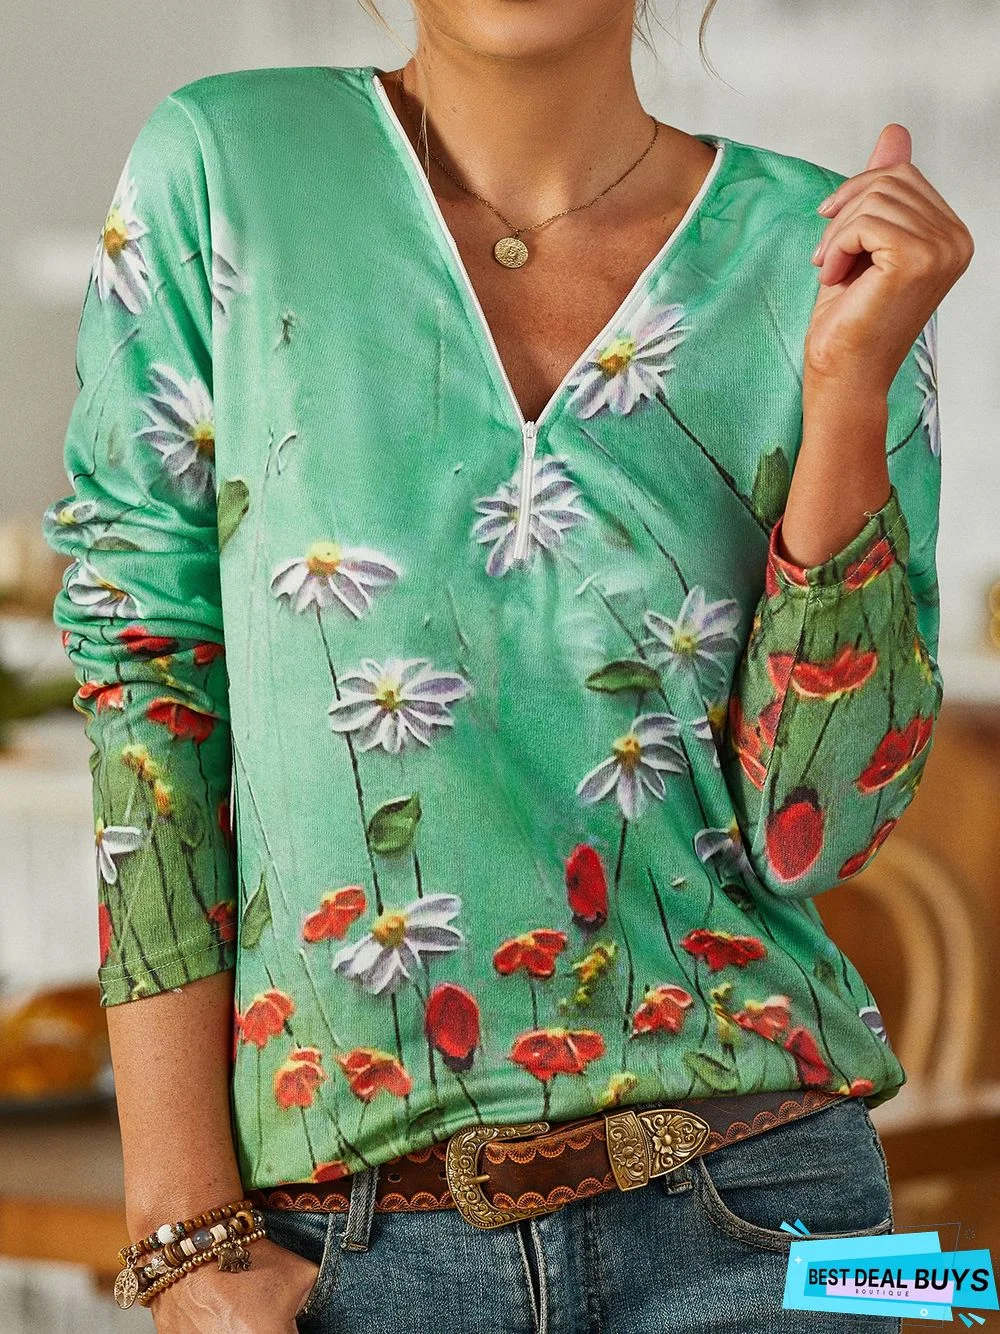 New Women Fashion Holiday Vintage Floral Long Sleeve Casual V Neck Tunic Top